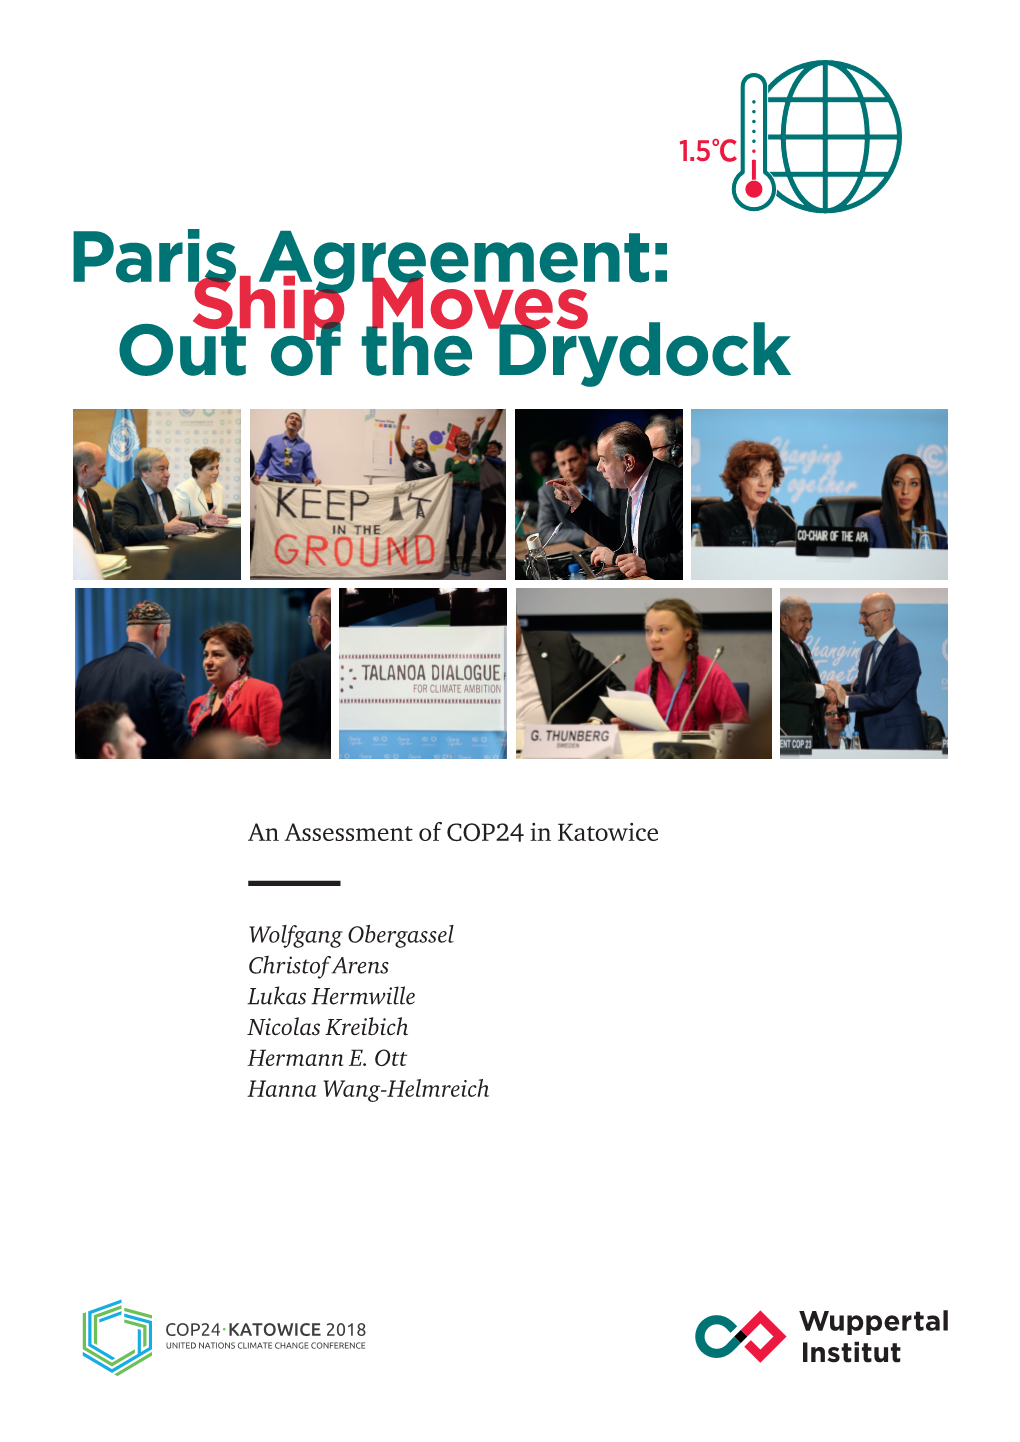 Paris Agreement: Ship Moves out of the Drydock